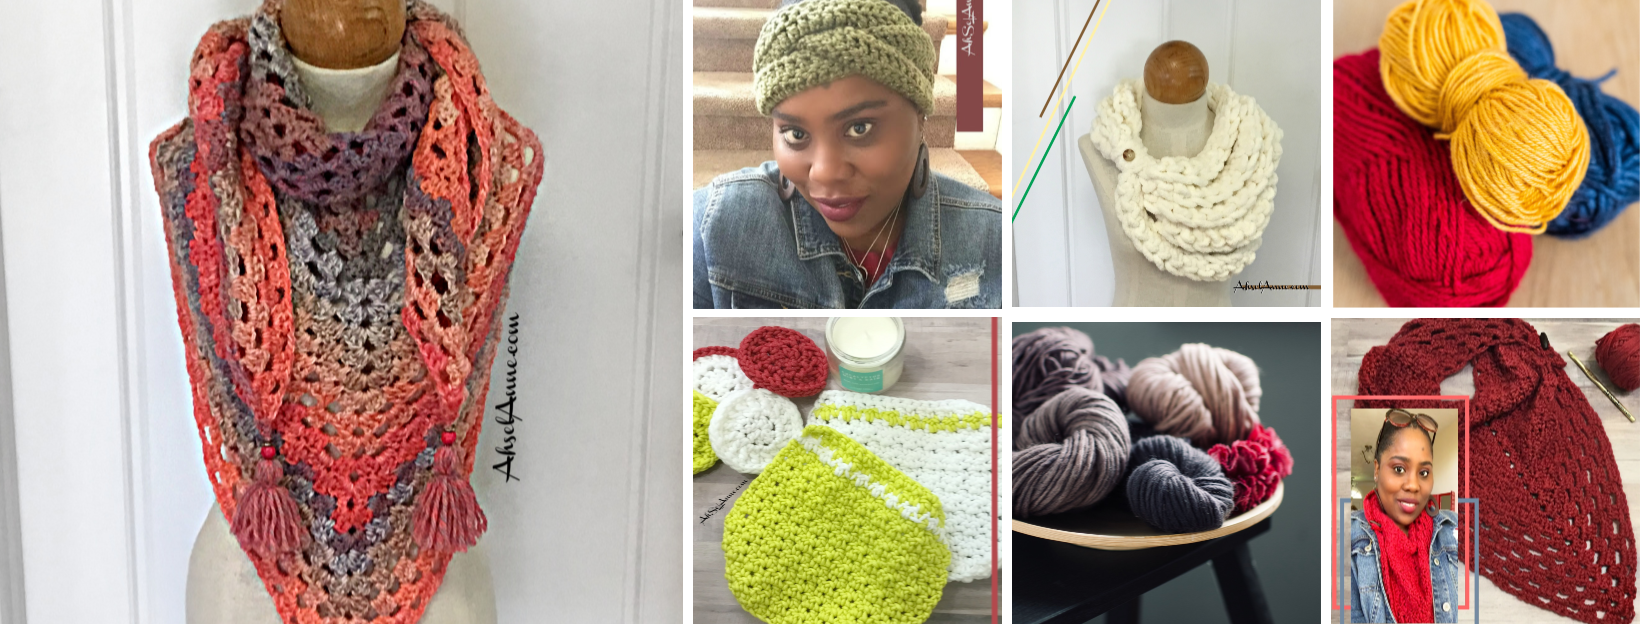 Crocheting and Teaching Others to Crochet